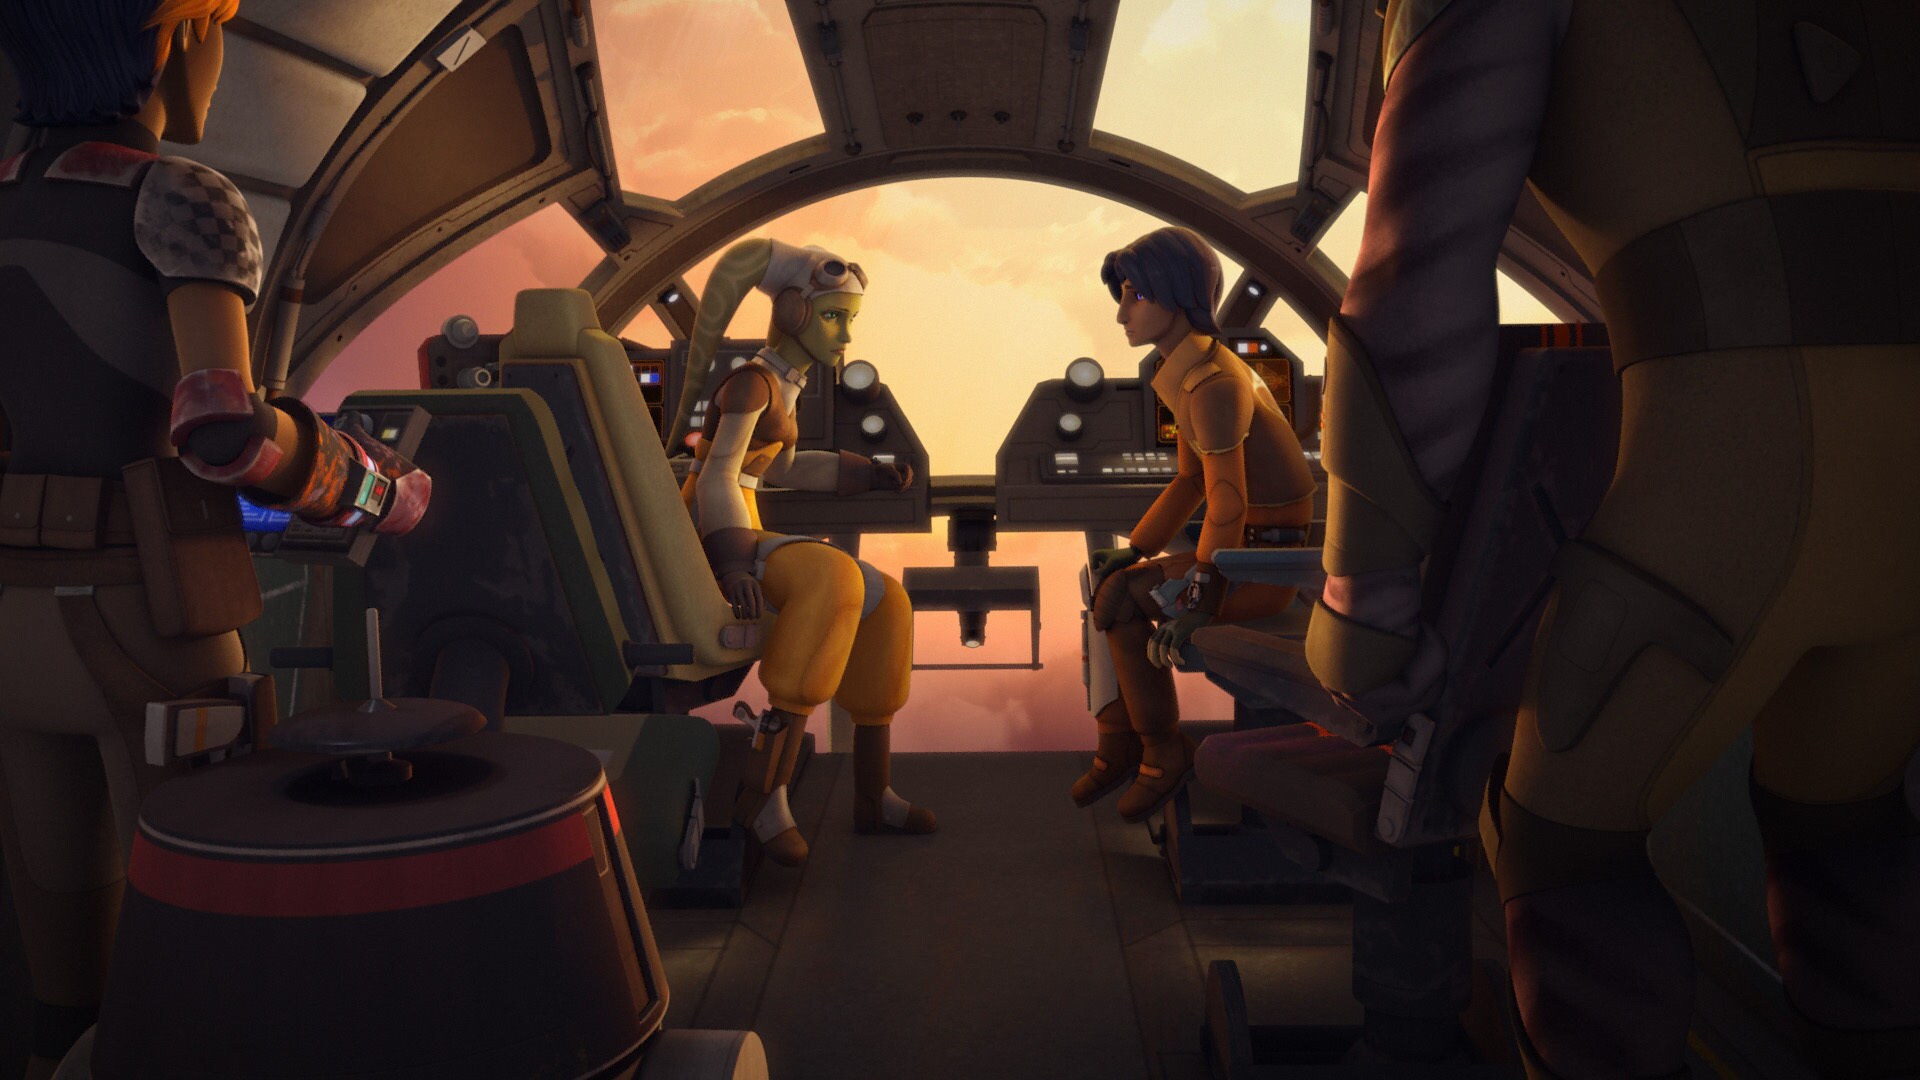 5 Life Lessons from Star Wars Rebels